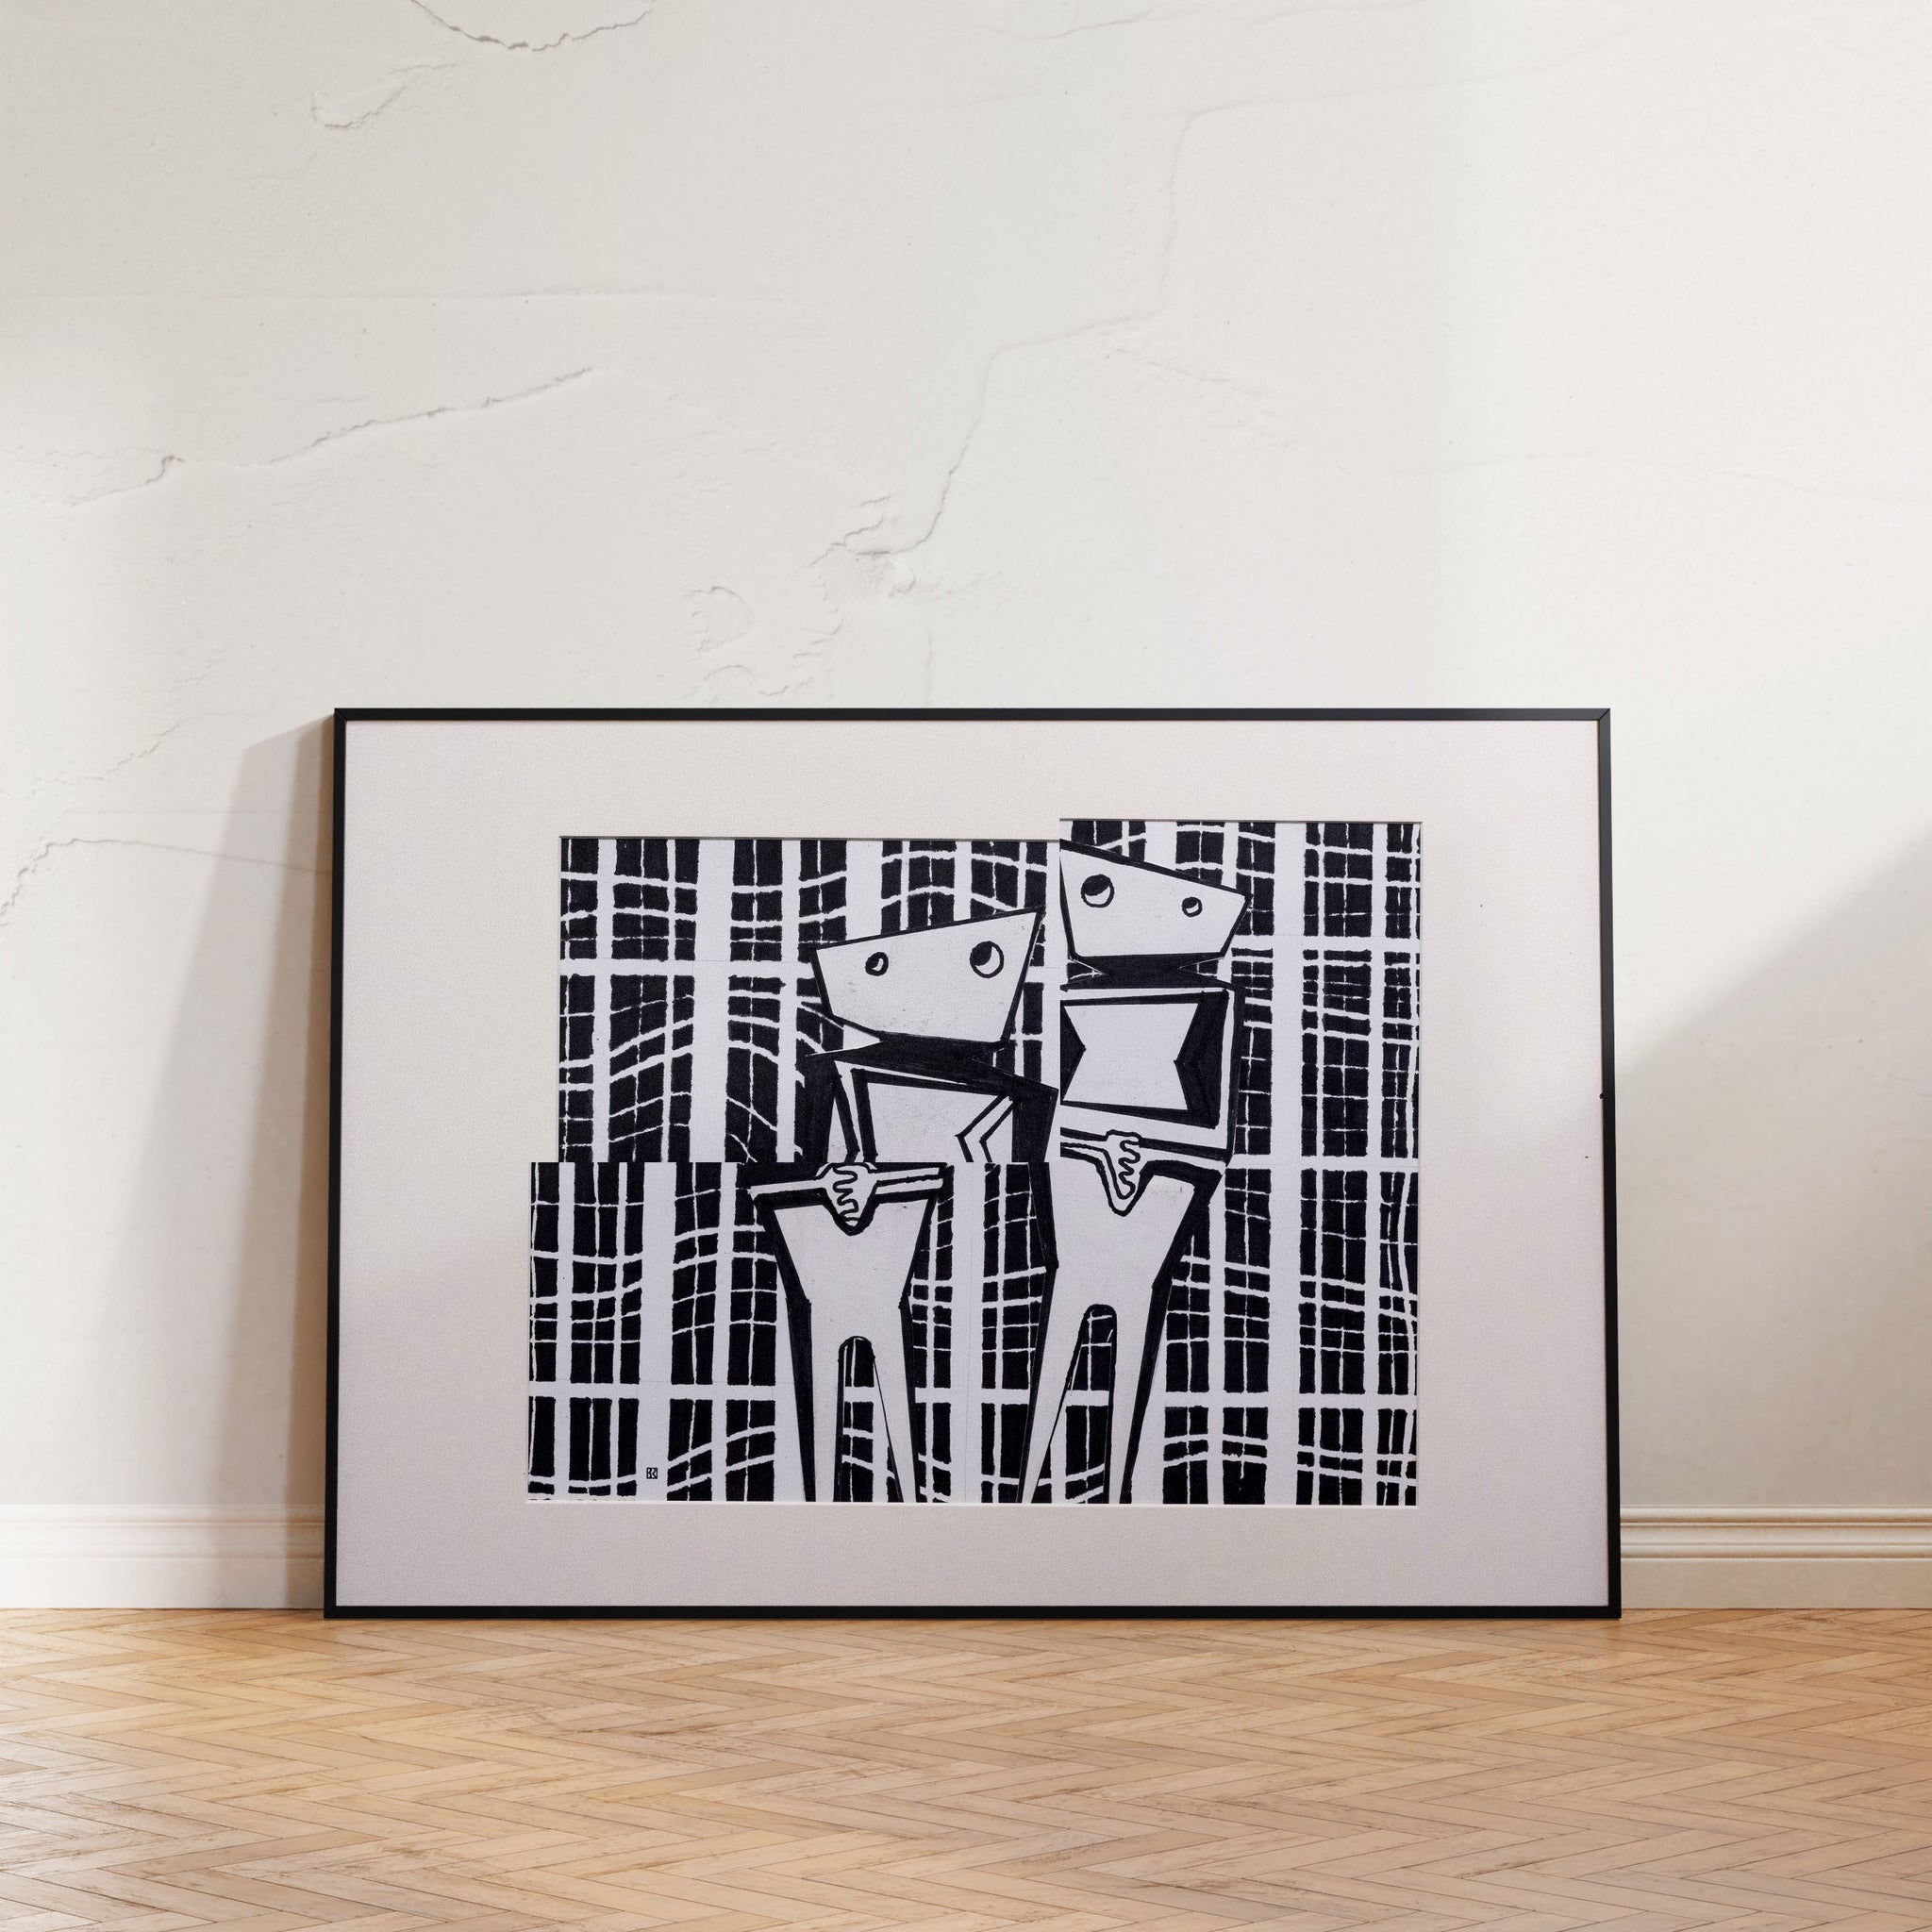 Monochromatic cubist portrait 'Kindred Spirits' by Brian Findleton, depicting two intertwined figures using intersecting materials like metal and fabric.